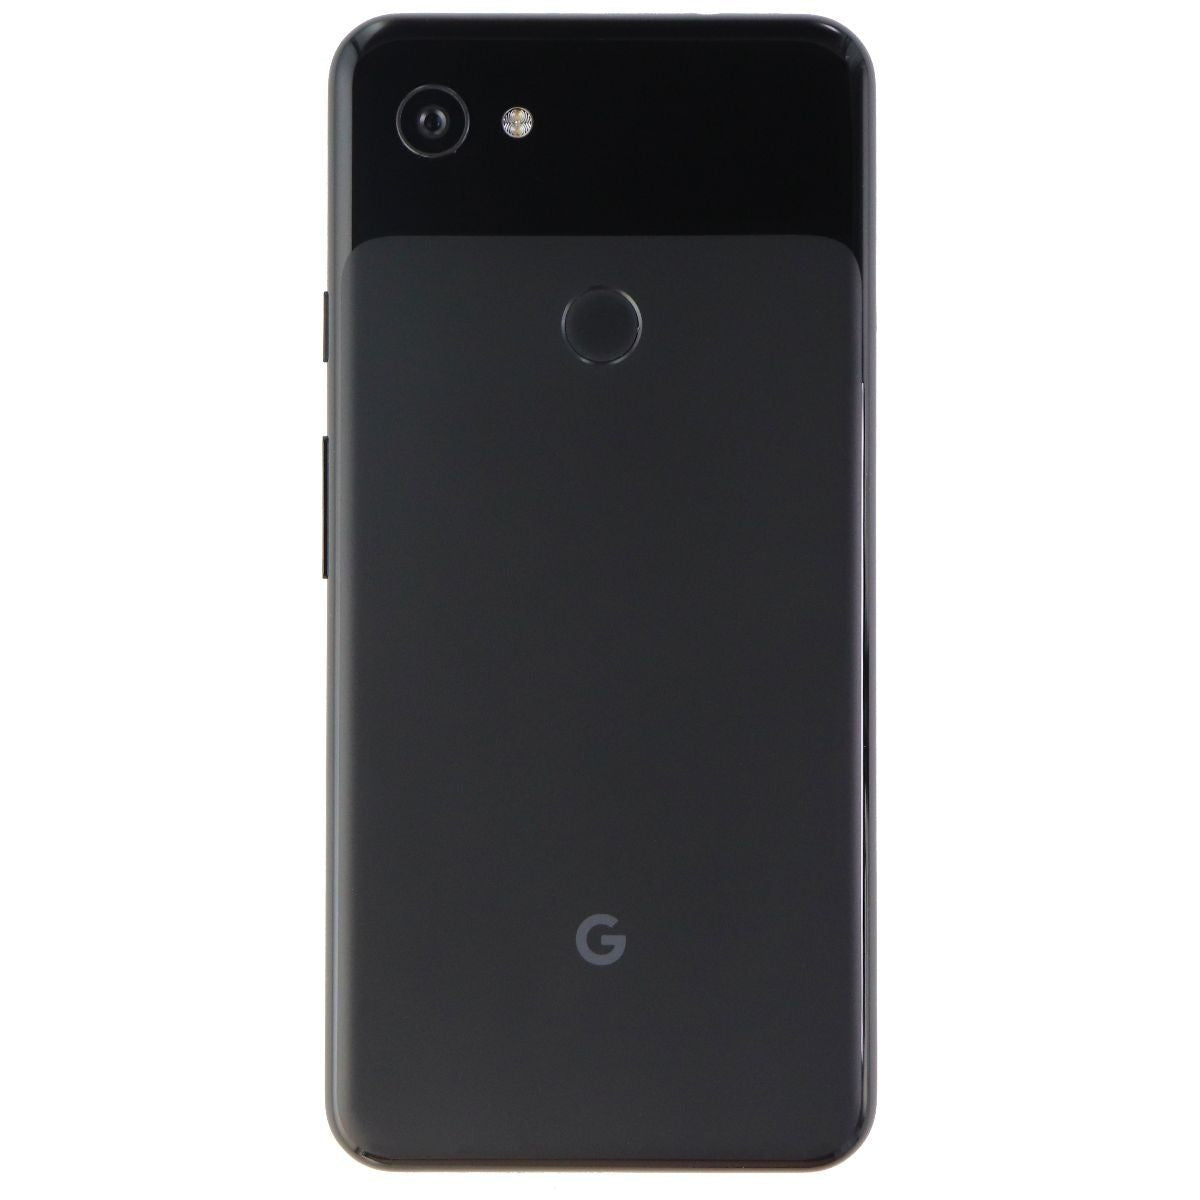 Google Pixel 3a XL (6.0-inch) Smartphone (G020A) GSM + CDMA - 64GB / Just Black Cell Phones & Smartphones Google    - Simple Cell Bulk Wholesale Pricing - USA Seller